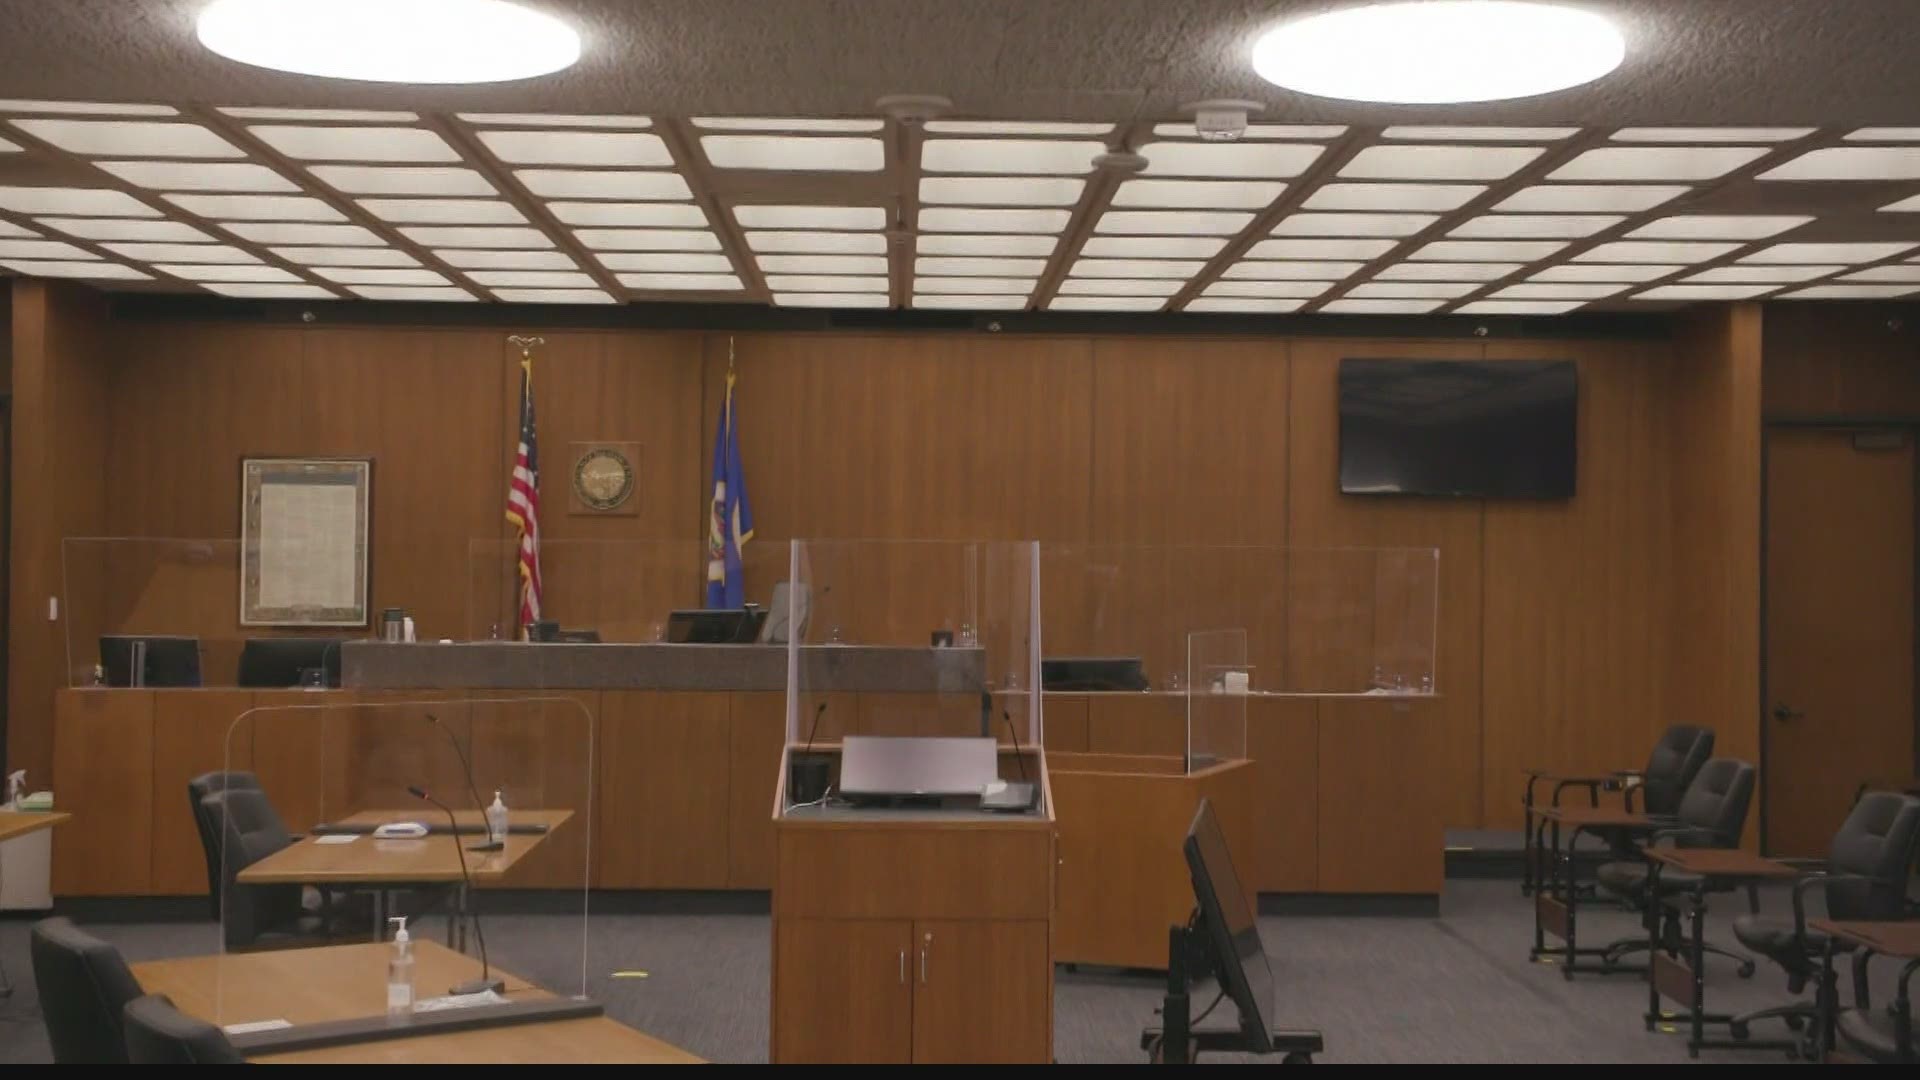 The judge in the case has denied a motion to fully sequester the jury in the Chauvin trial.